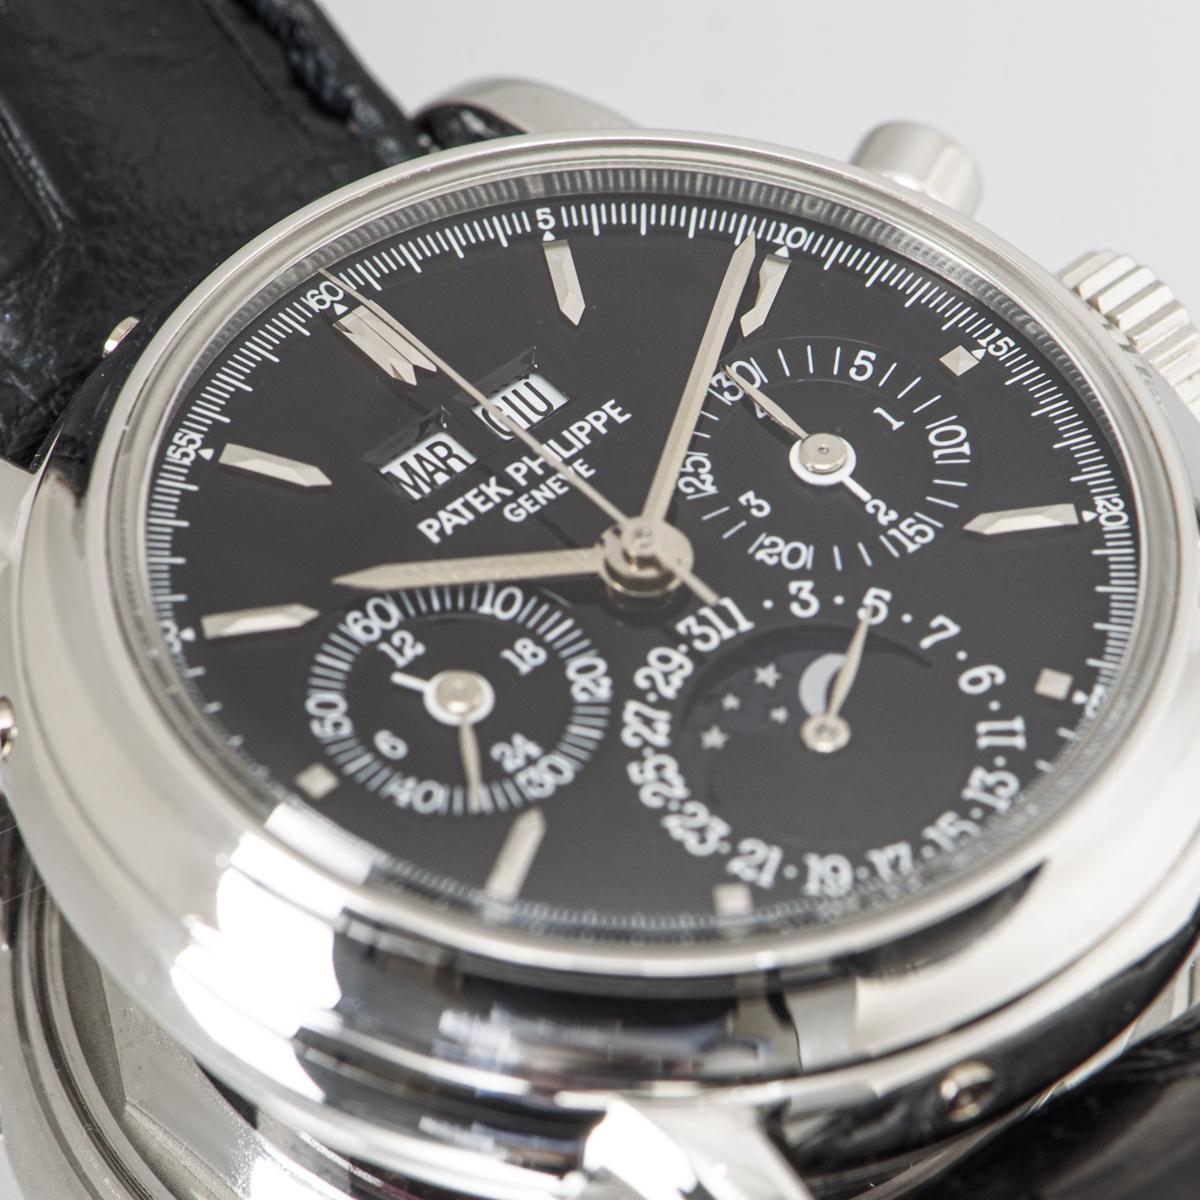 A very rare Grand Complications 36mm Perpetual Calendar Chronograph in platinum by Patek Philippe. Its black dial features displays of the moon phase, the date, day, month and leap year as well as featuring the three chronograph counters. To find